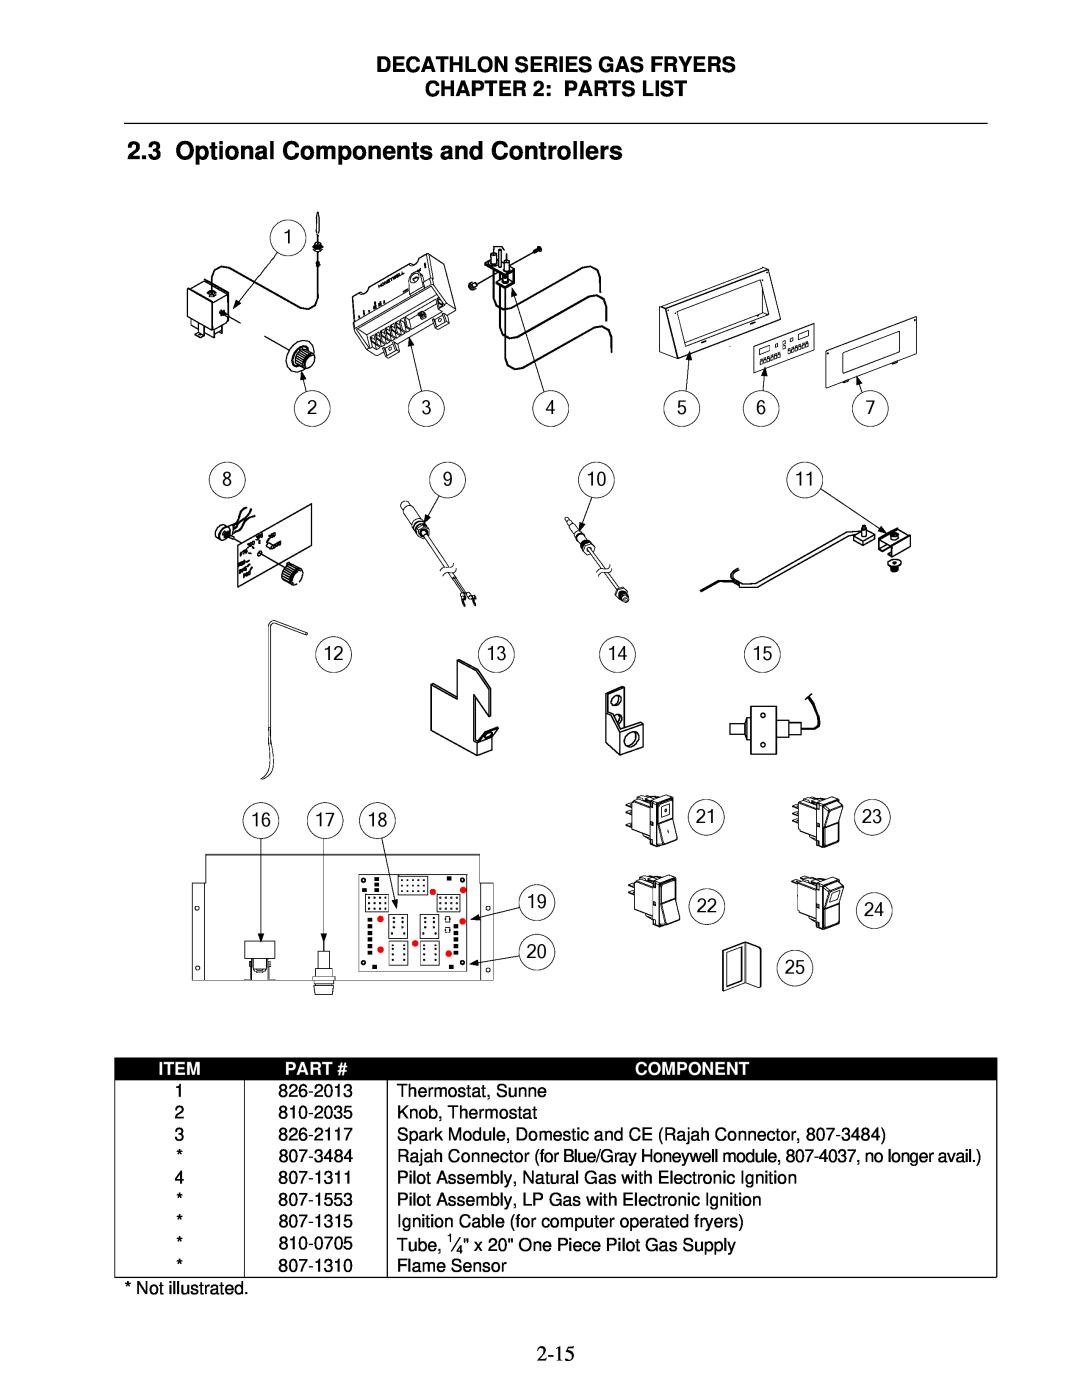 Frymaster SCFD, FPD manual Optional Components and Controllers, Decathlon Series Gas Fryers : Parts List 